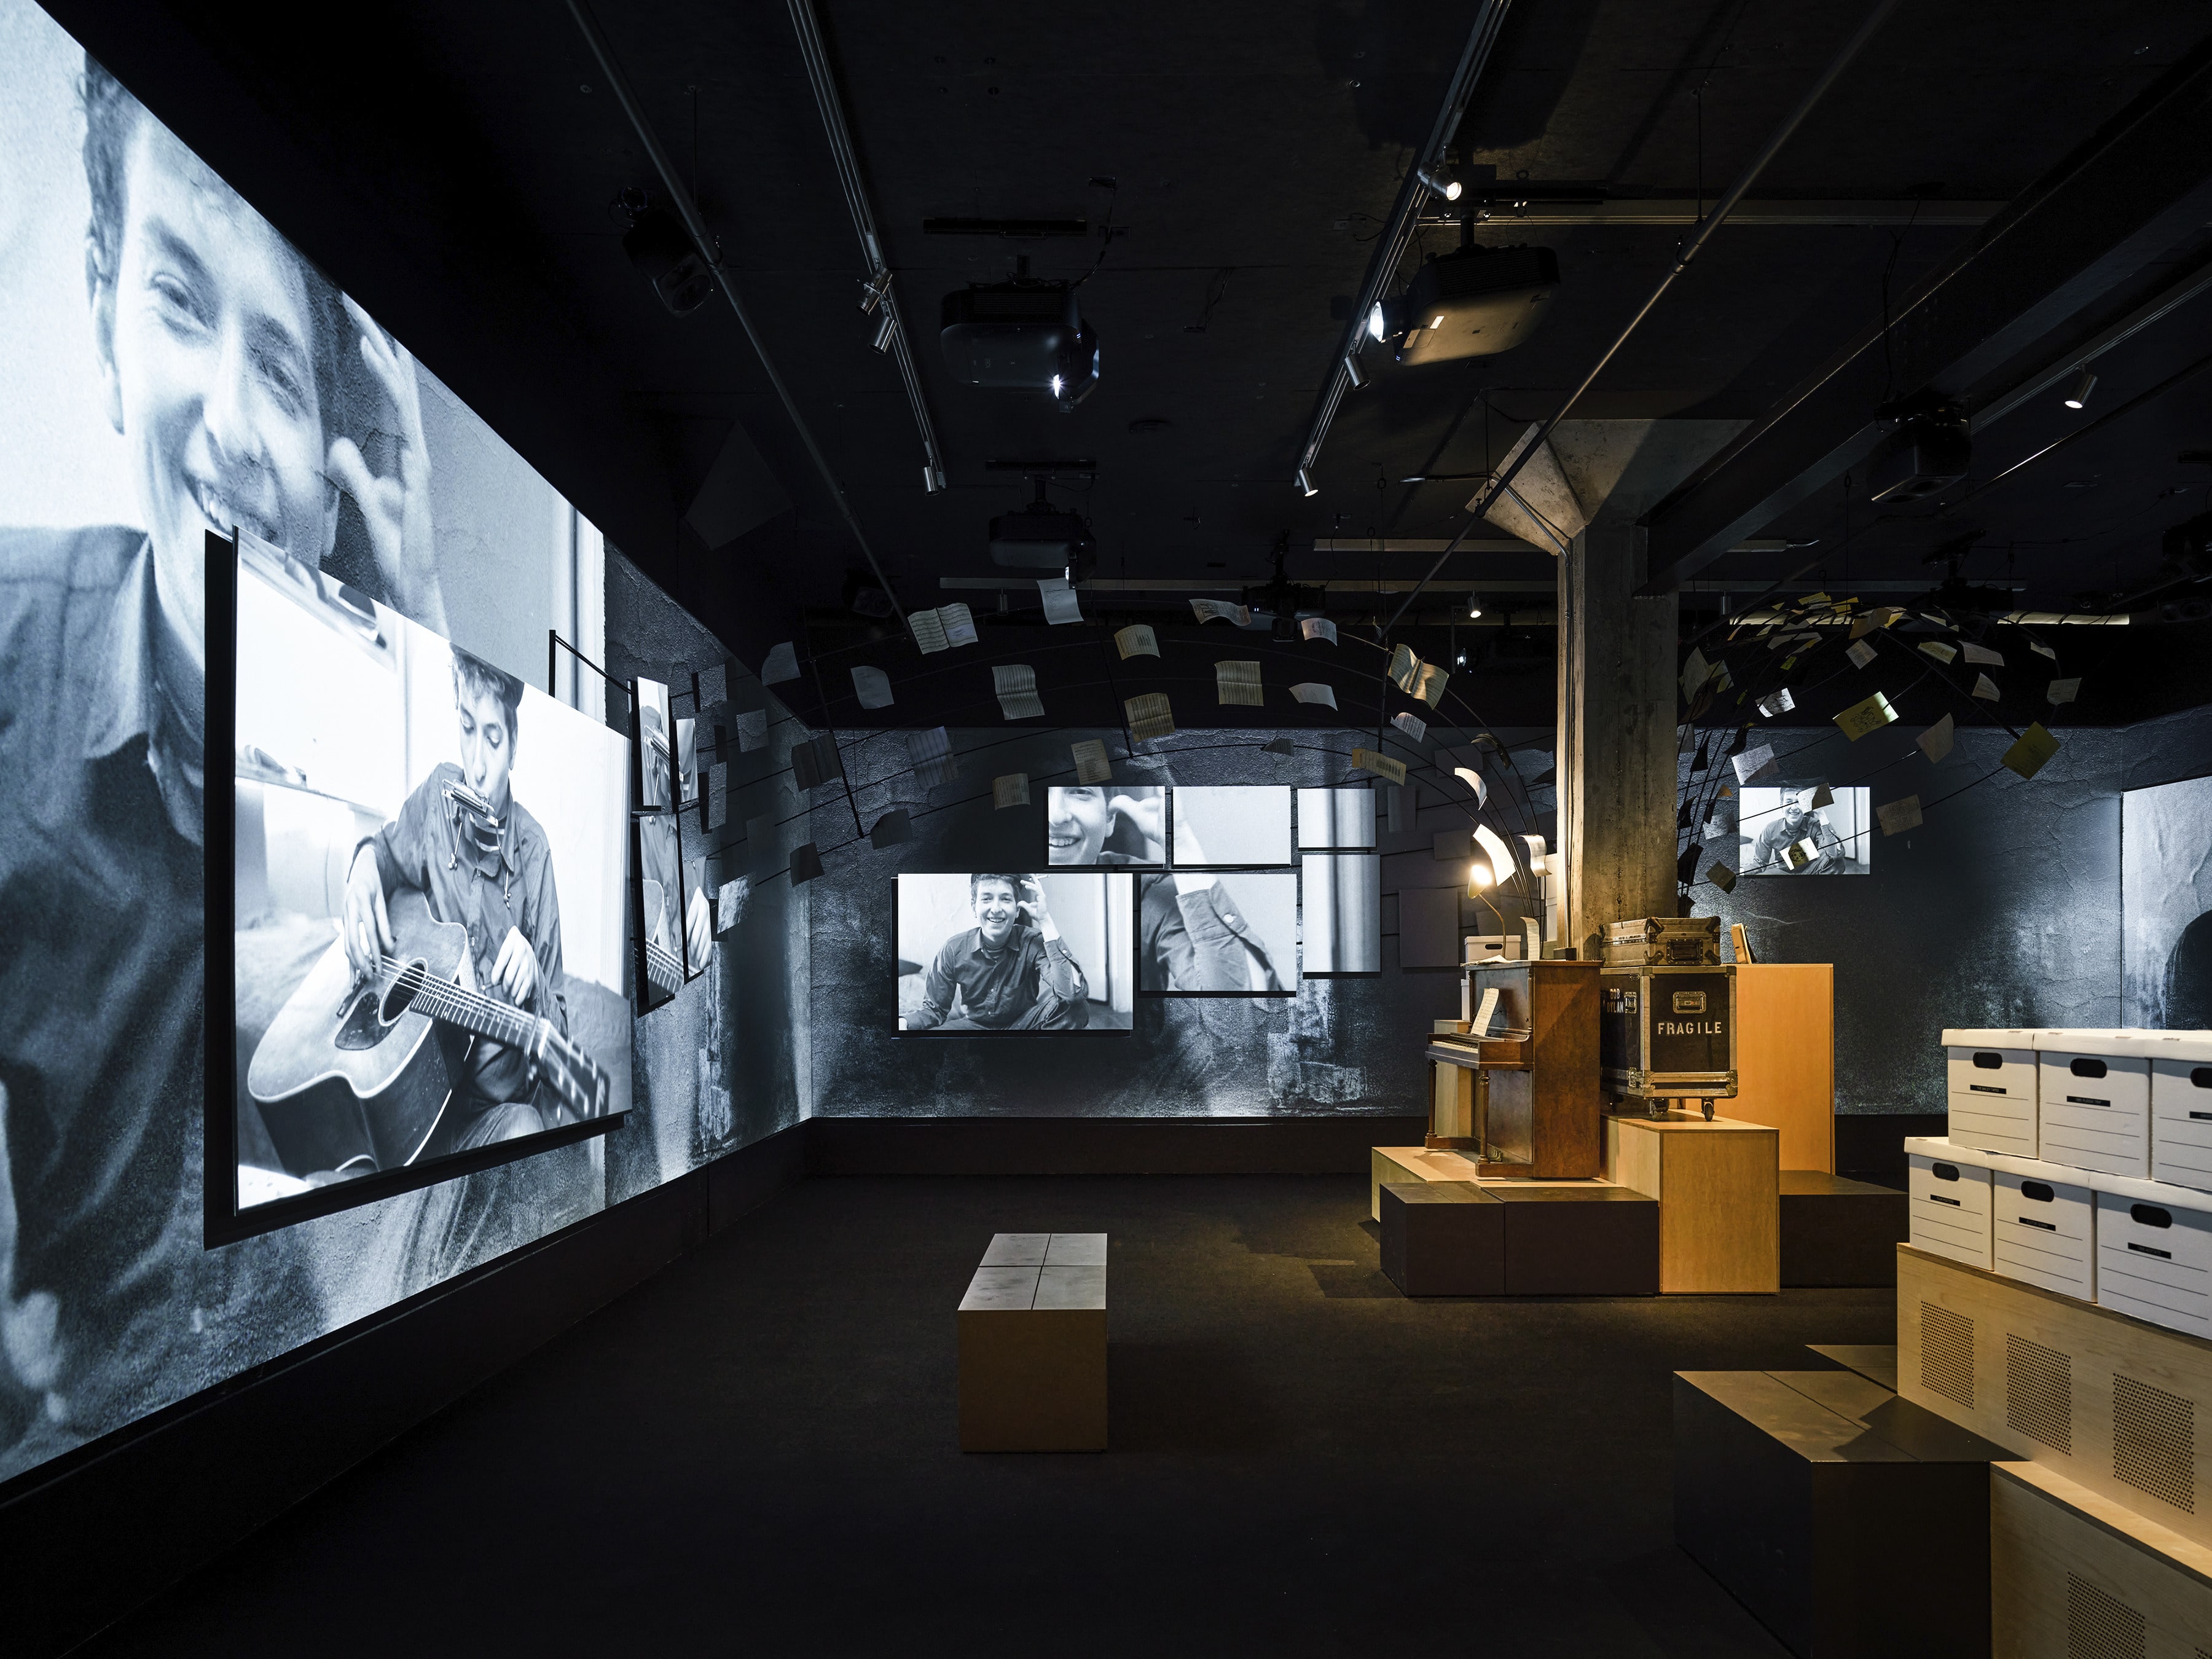 Projectors featuring Bob Dylan's career journey